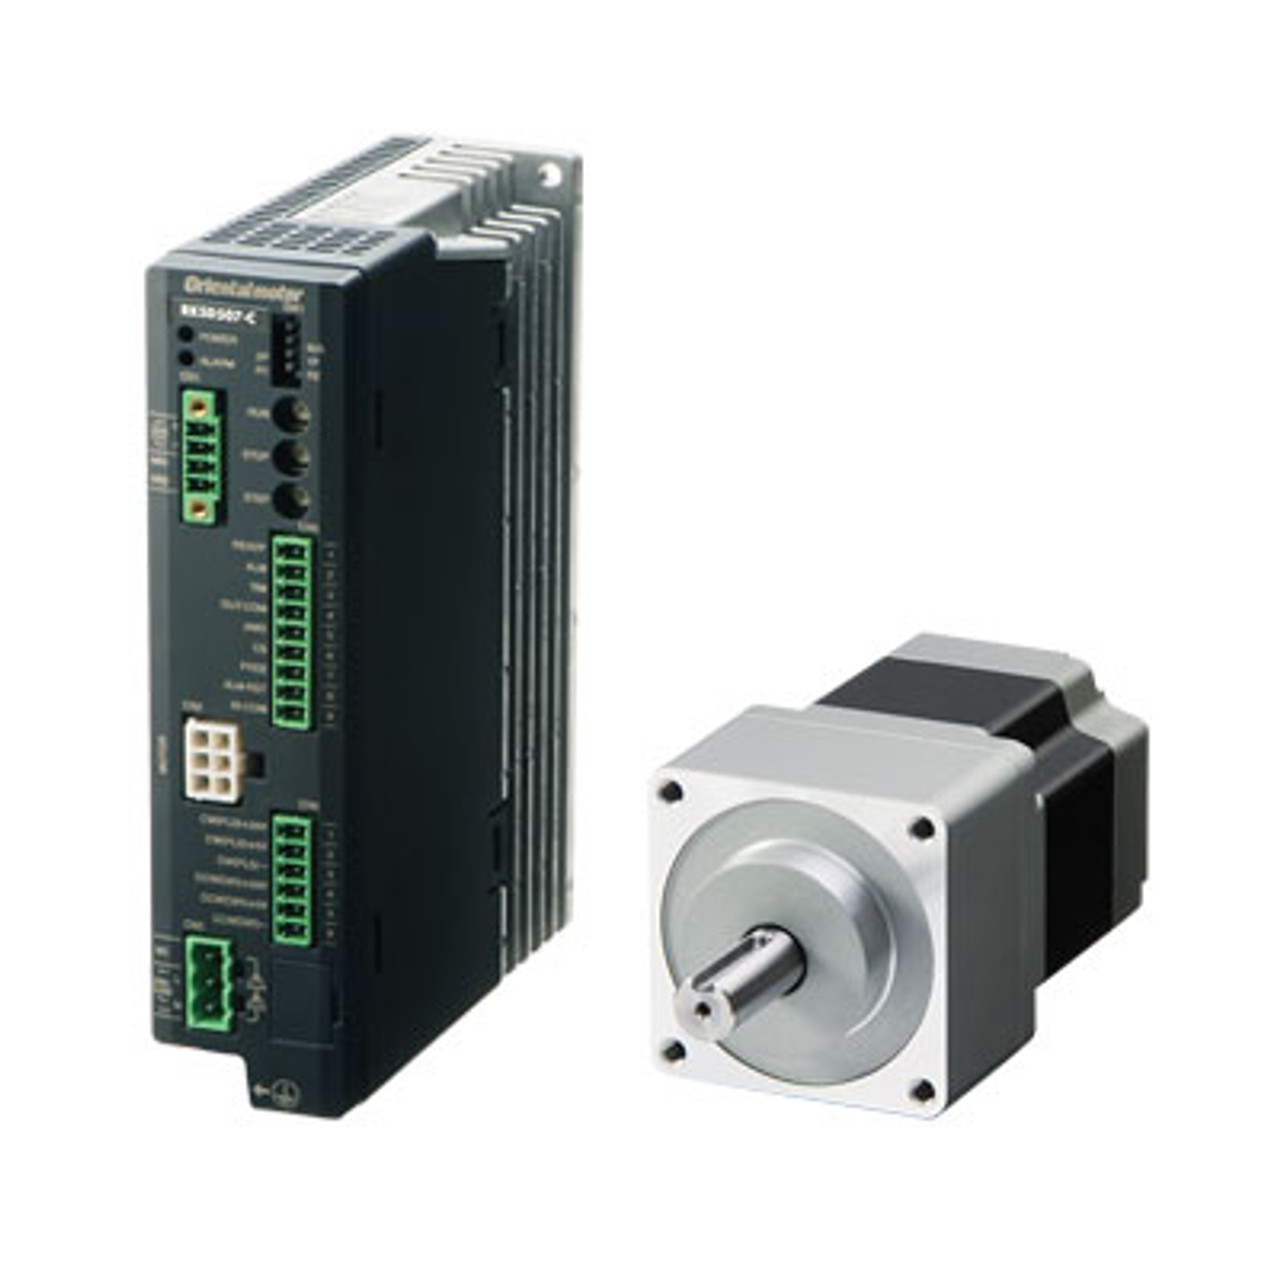 RKS566BC-PS7.2-3 - Product Image